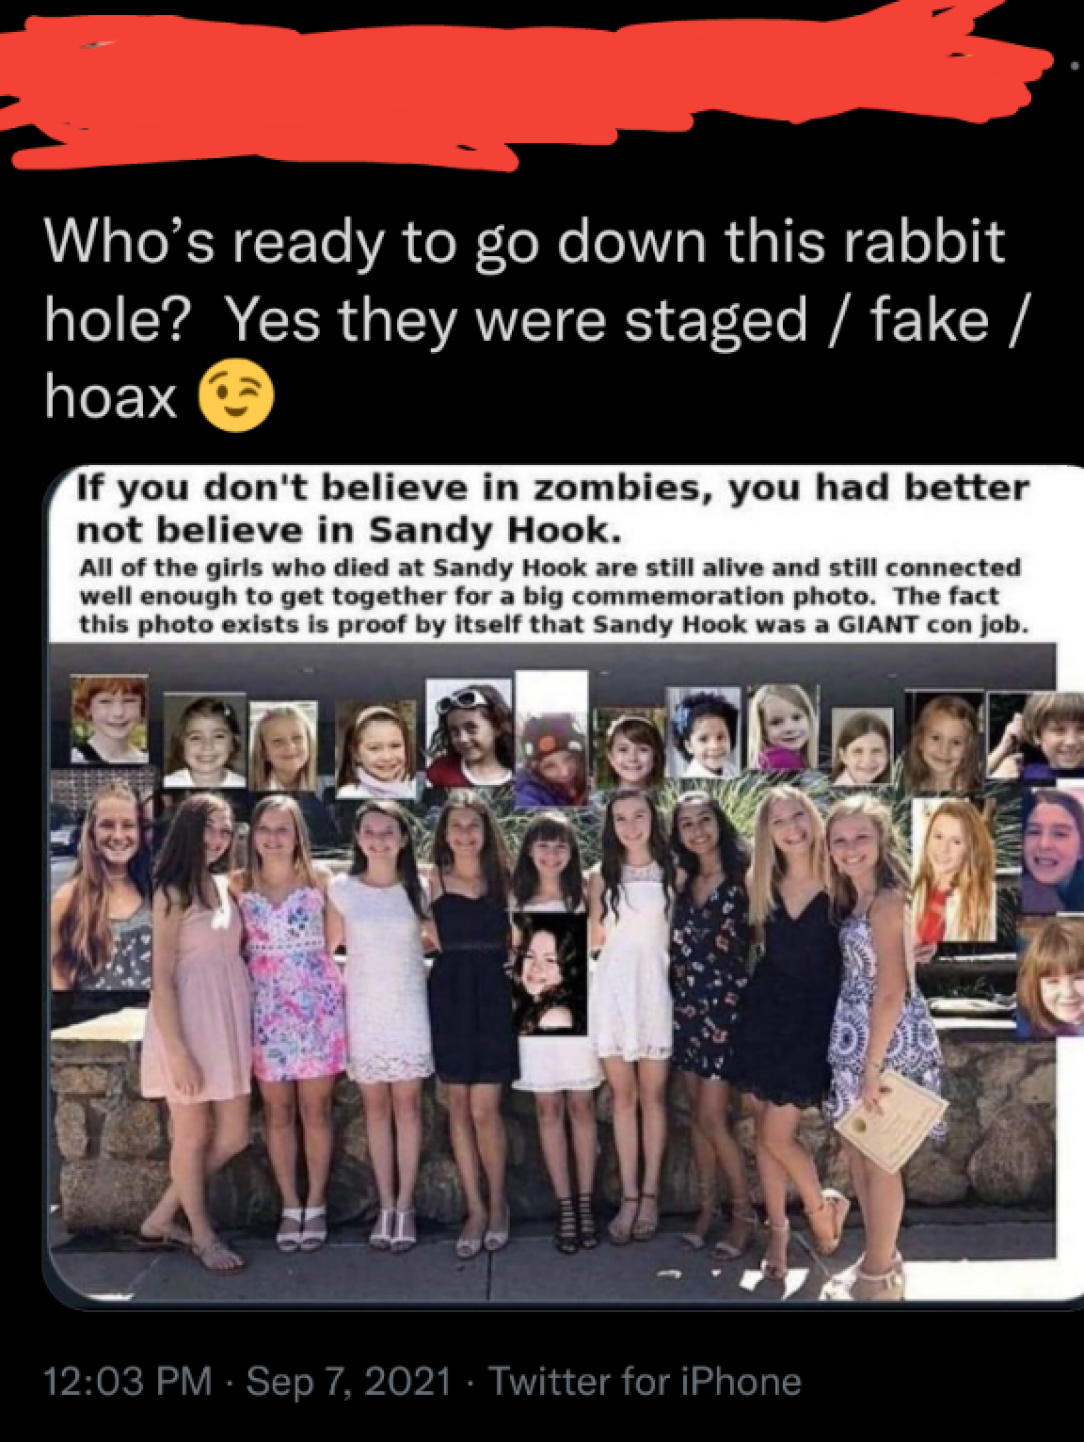 Nearly a decade later and Sandy Hook truthers have gotten worse. Fuck these people